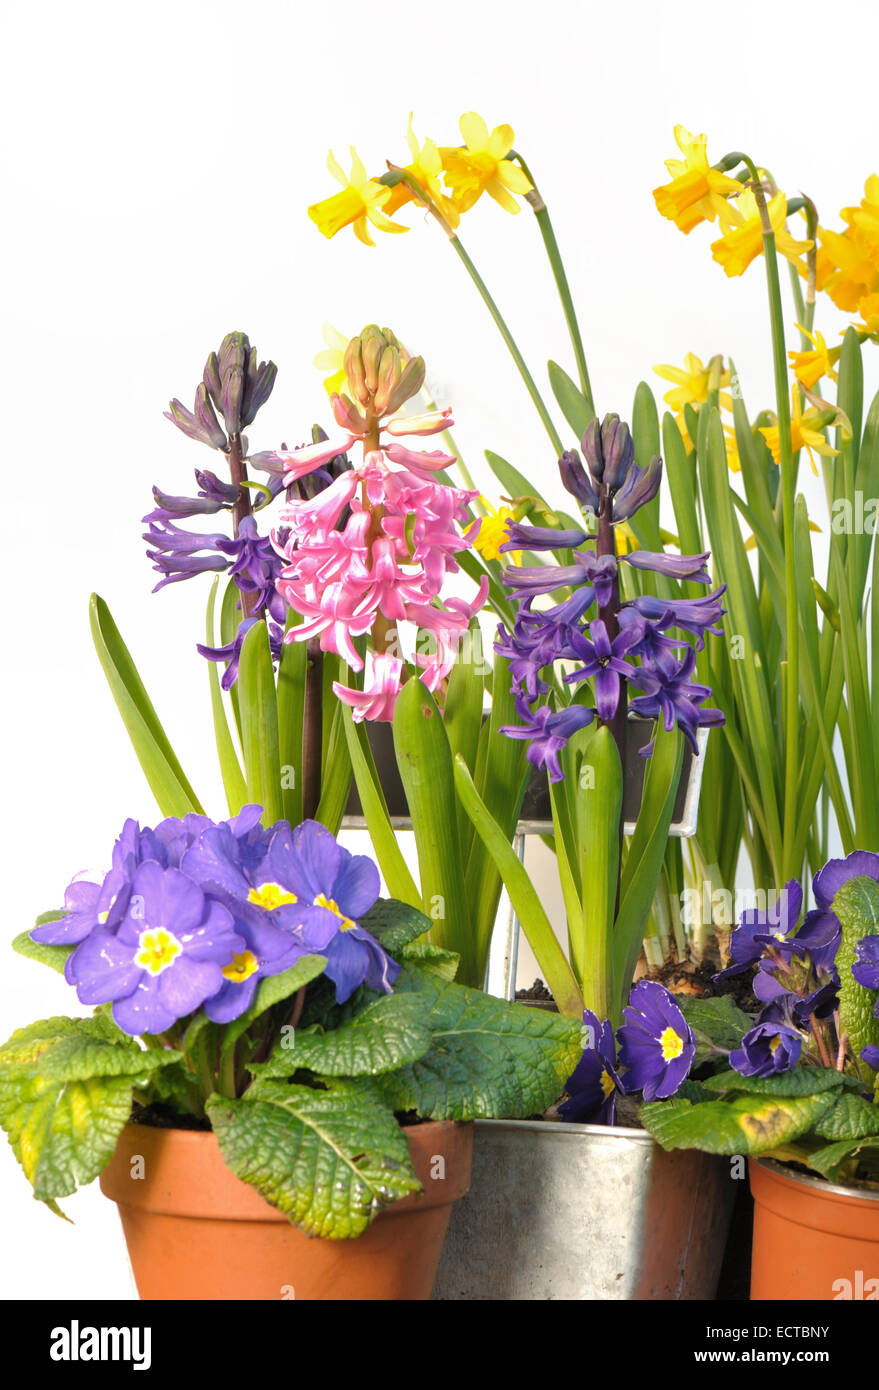 blooming spring flowers, hyacinths, daffodils and primroses Stock Photo